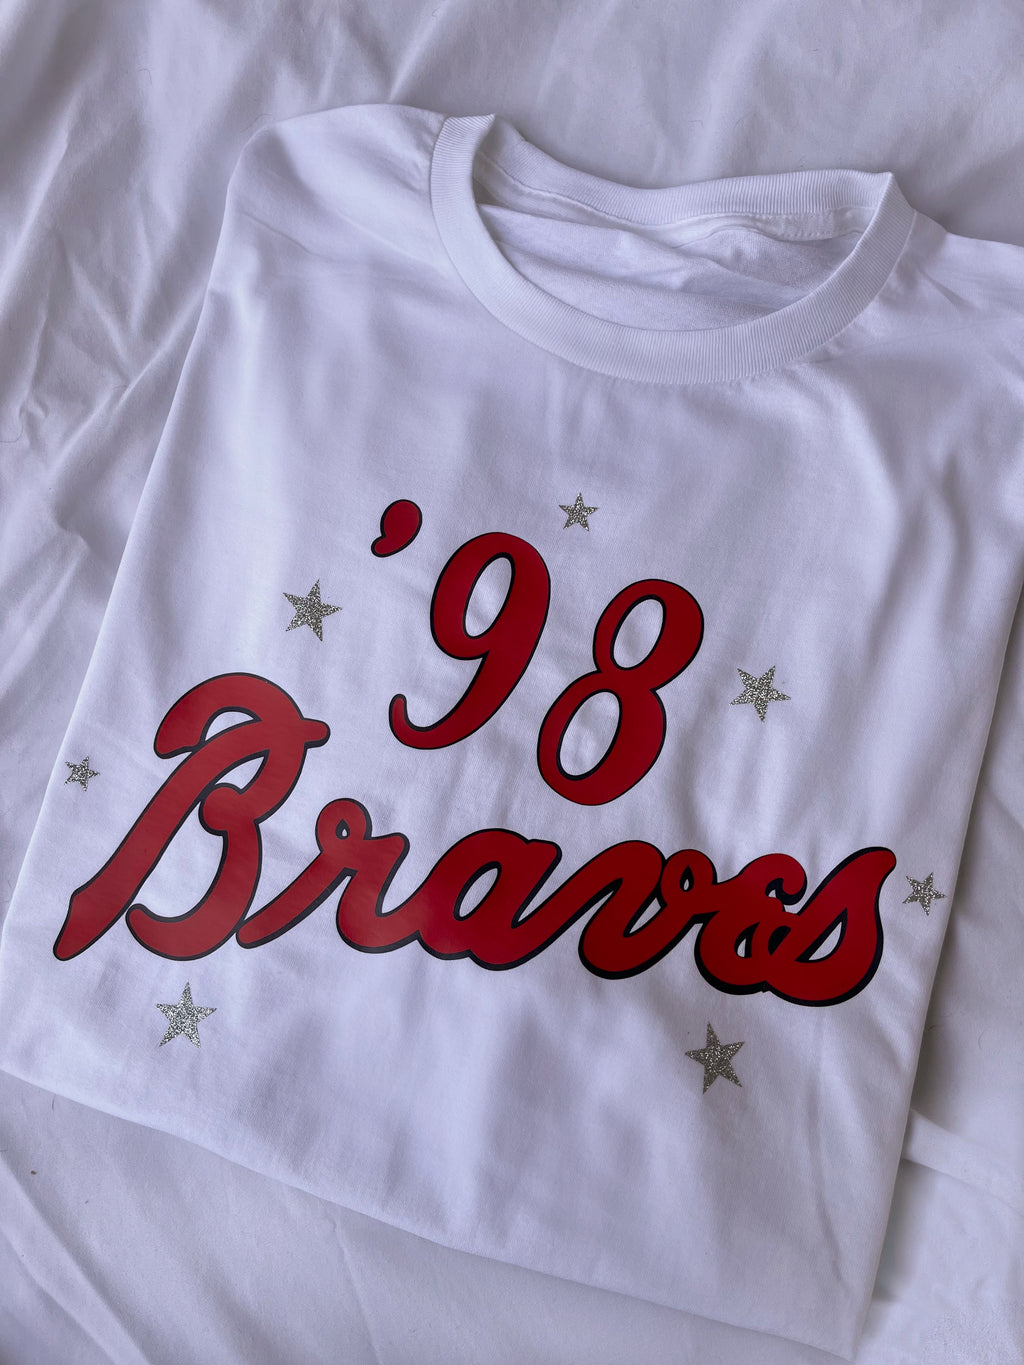 98 braves outfit concert｜TikTok Search